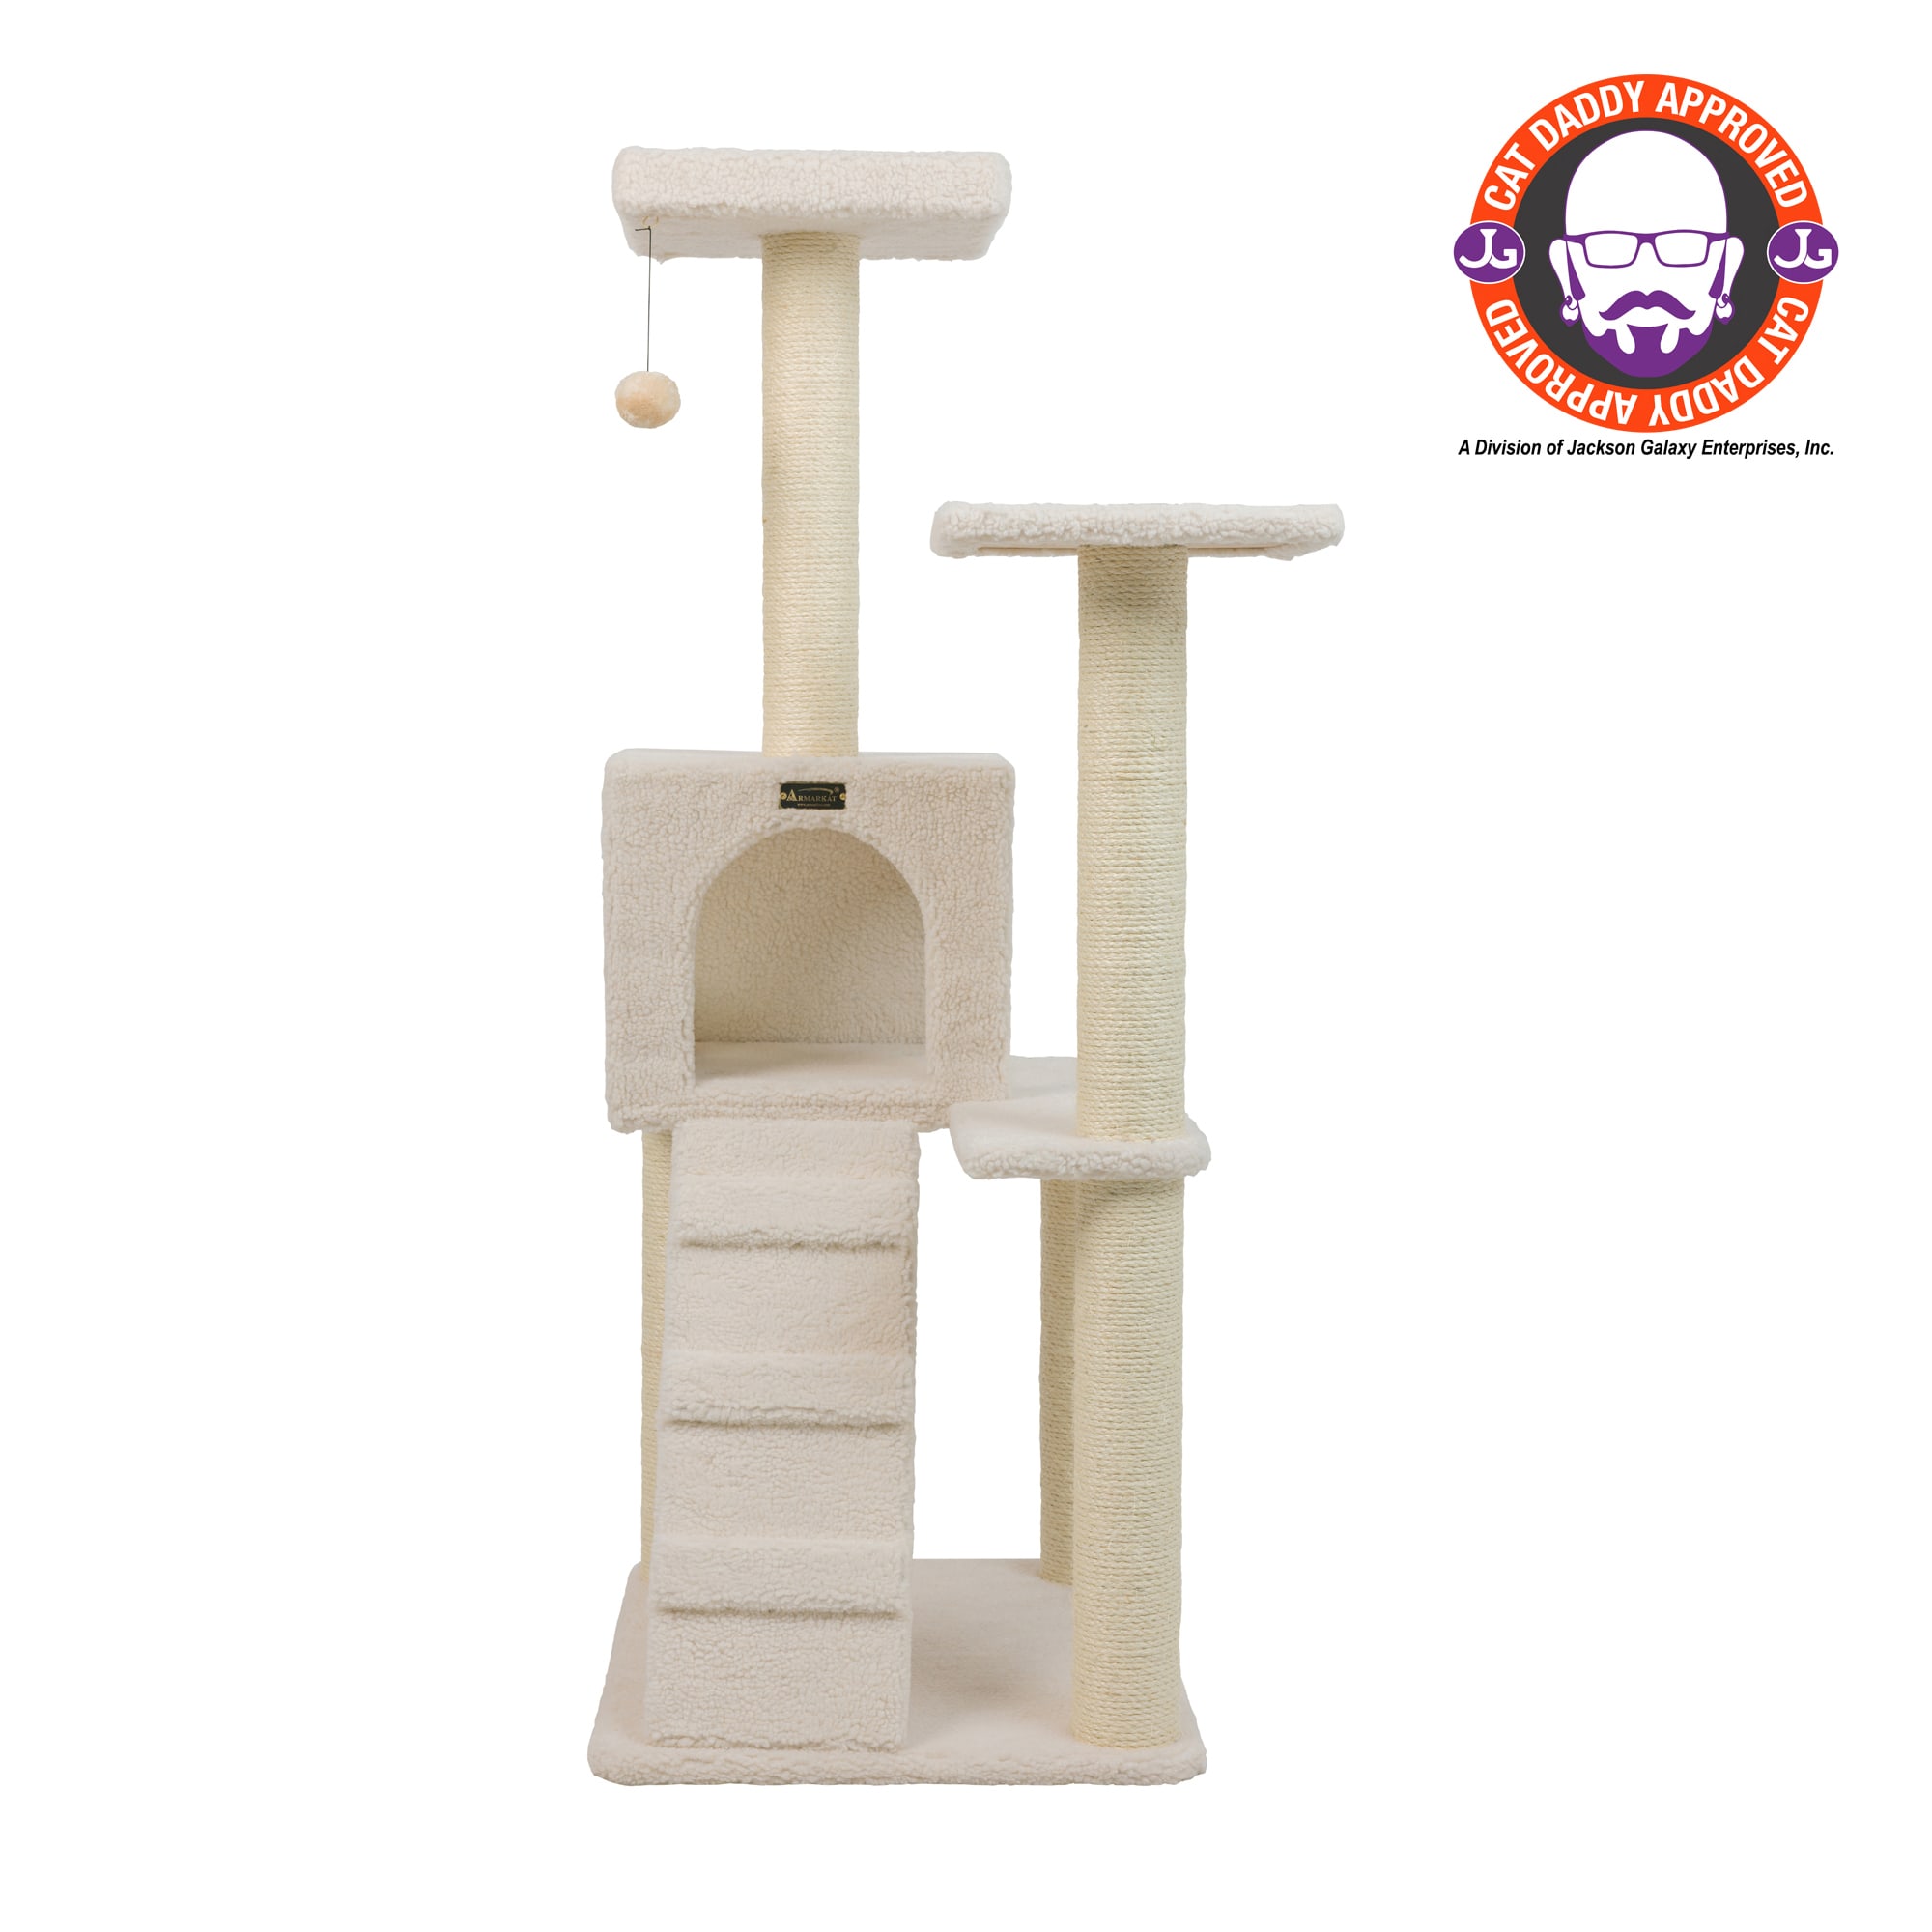 Photos - Other for Cats Armarkat Classic Real Wood Cat Tree B5301 Ivory, 53" H, Medium, O 